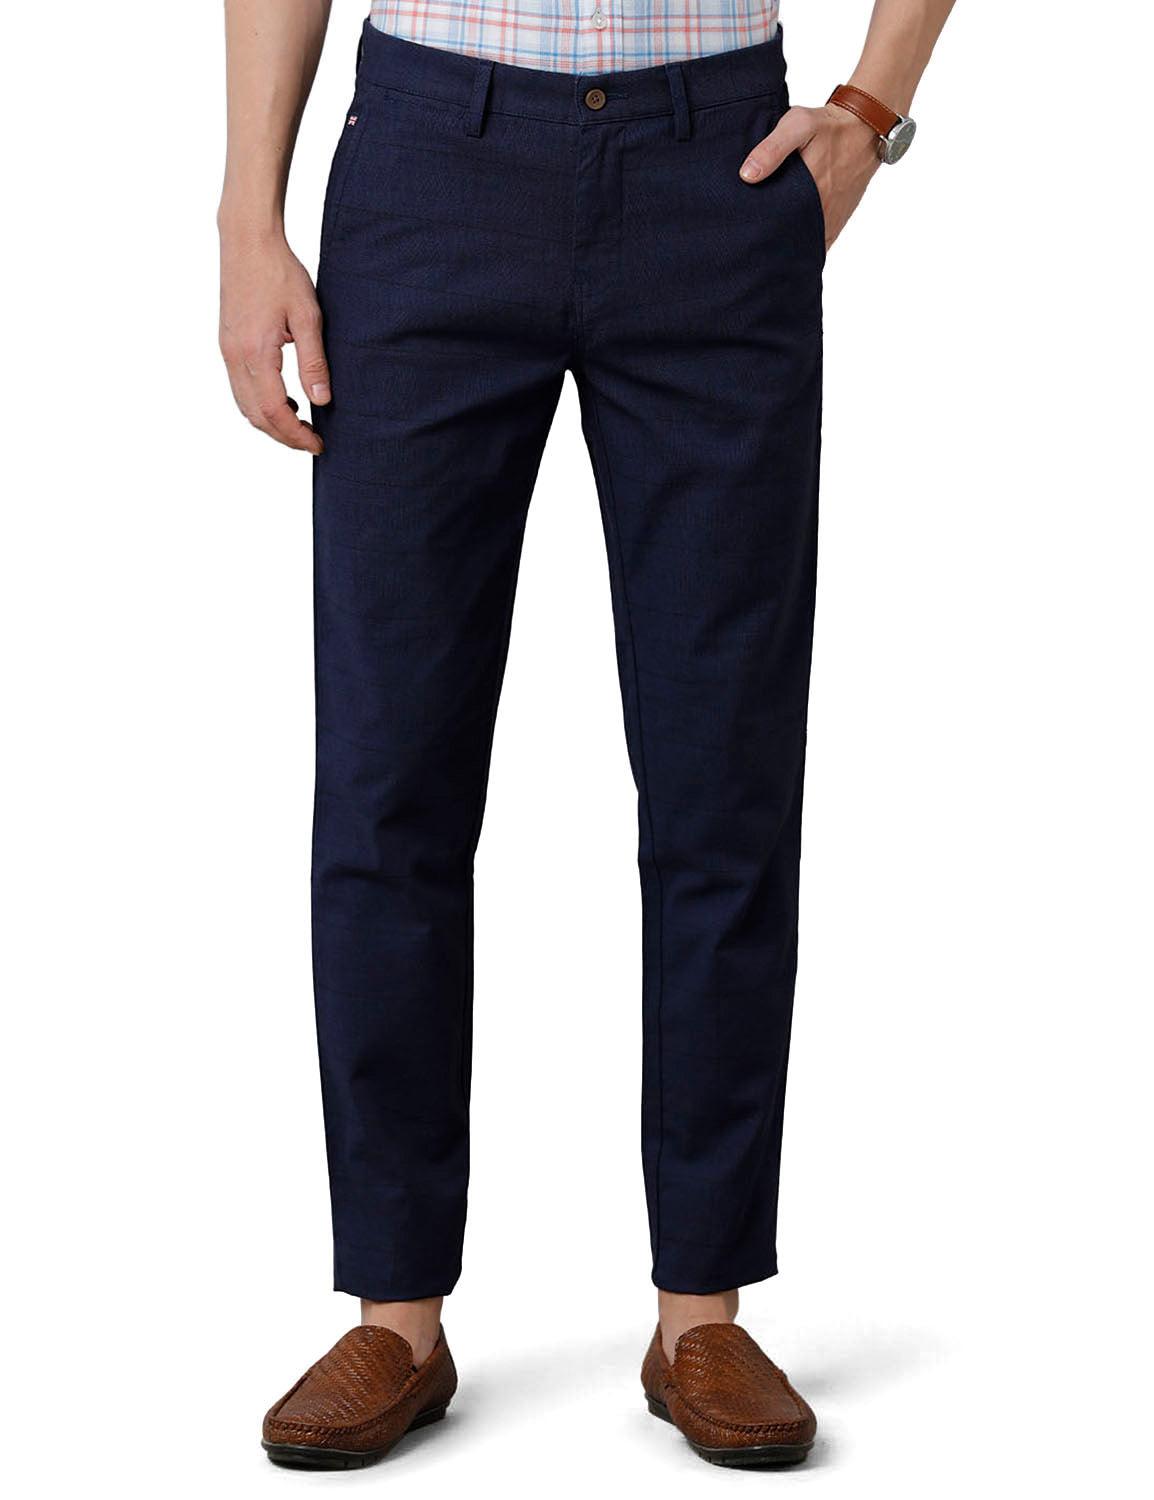 Navy Blue Solid Slim Fit Trouser - Double Two